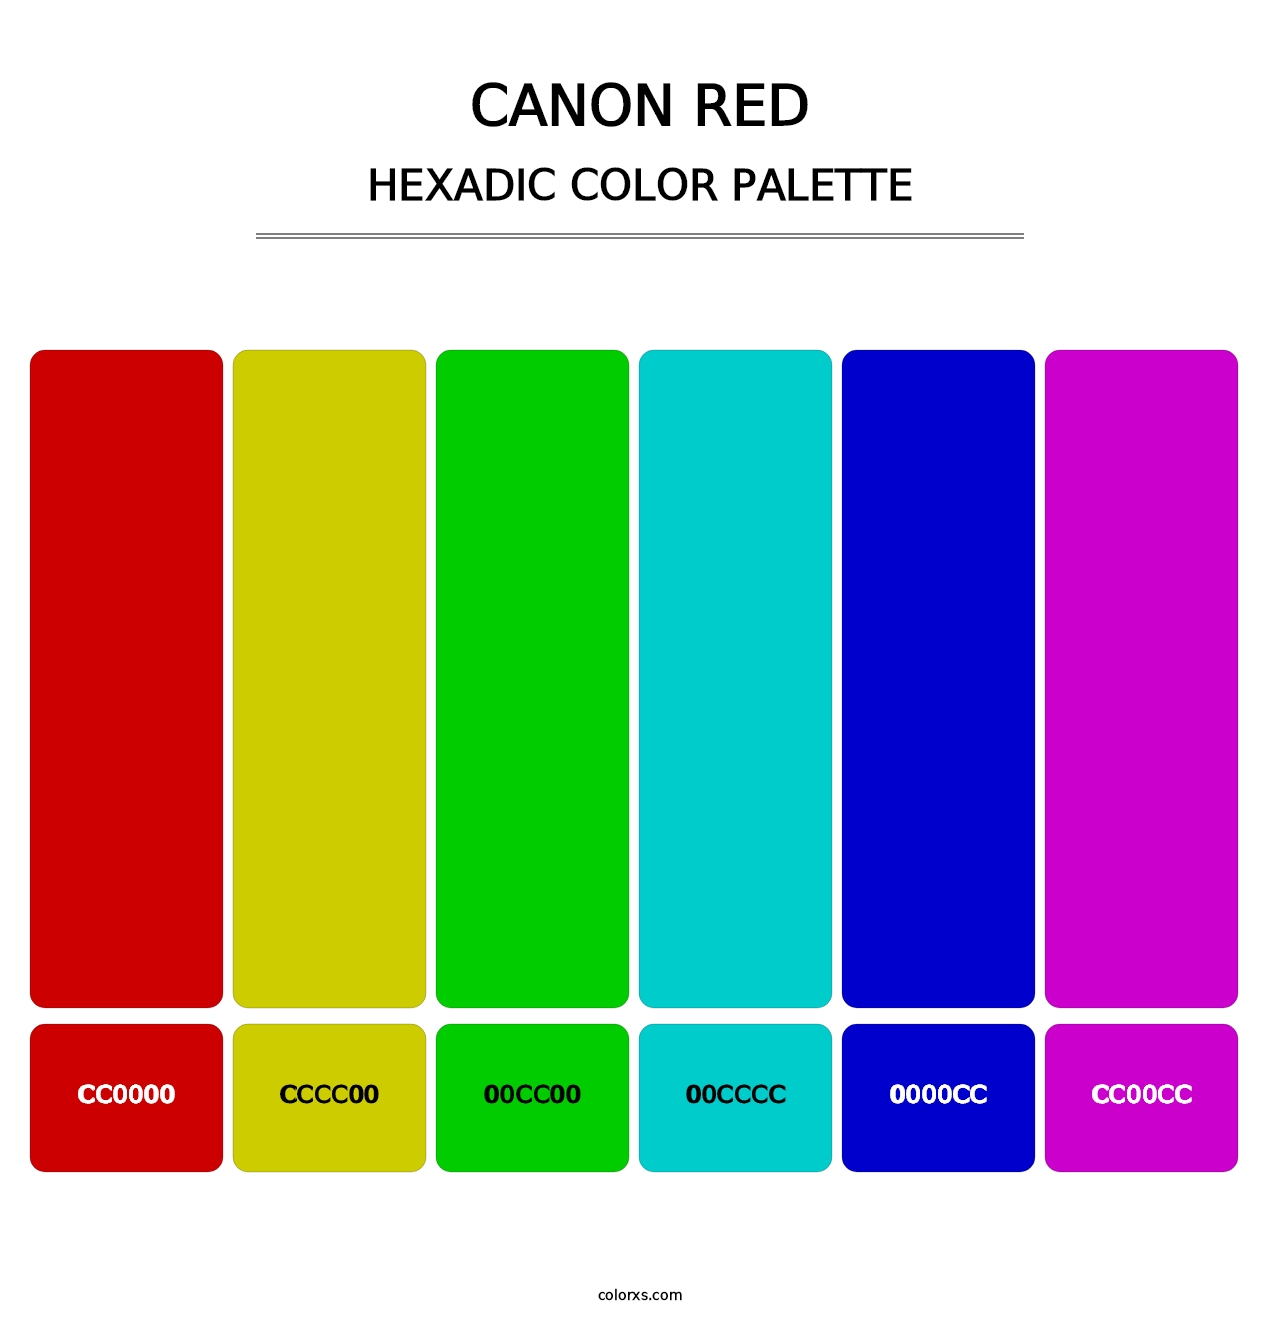 Canon Red - Hexadic Color Palette